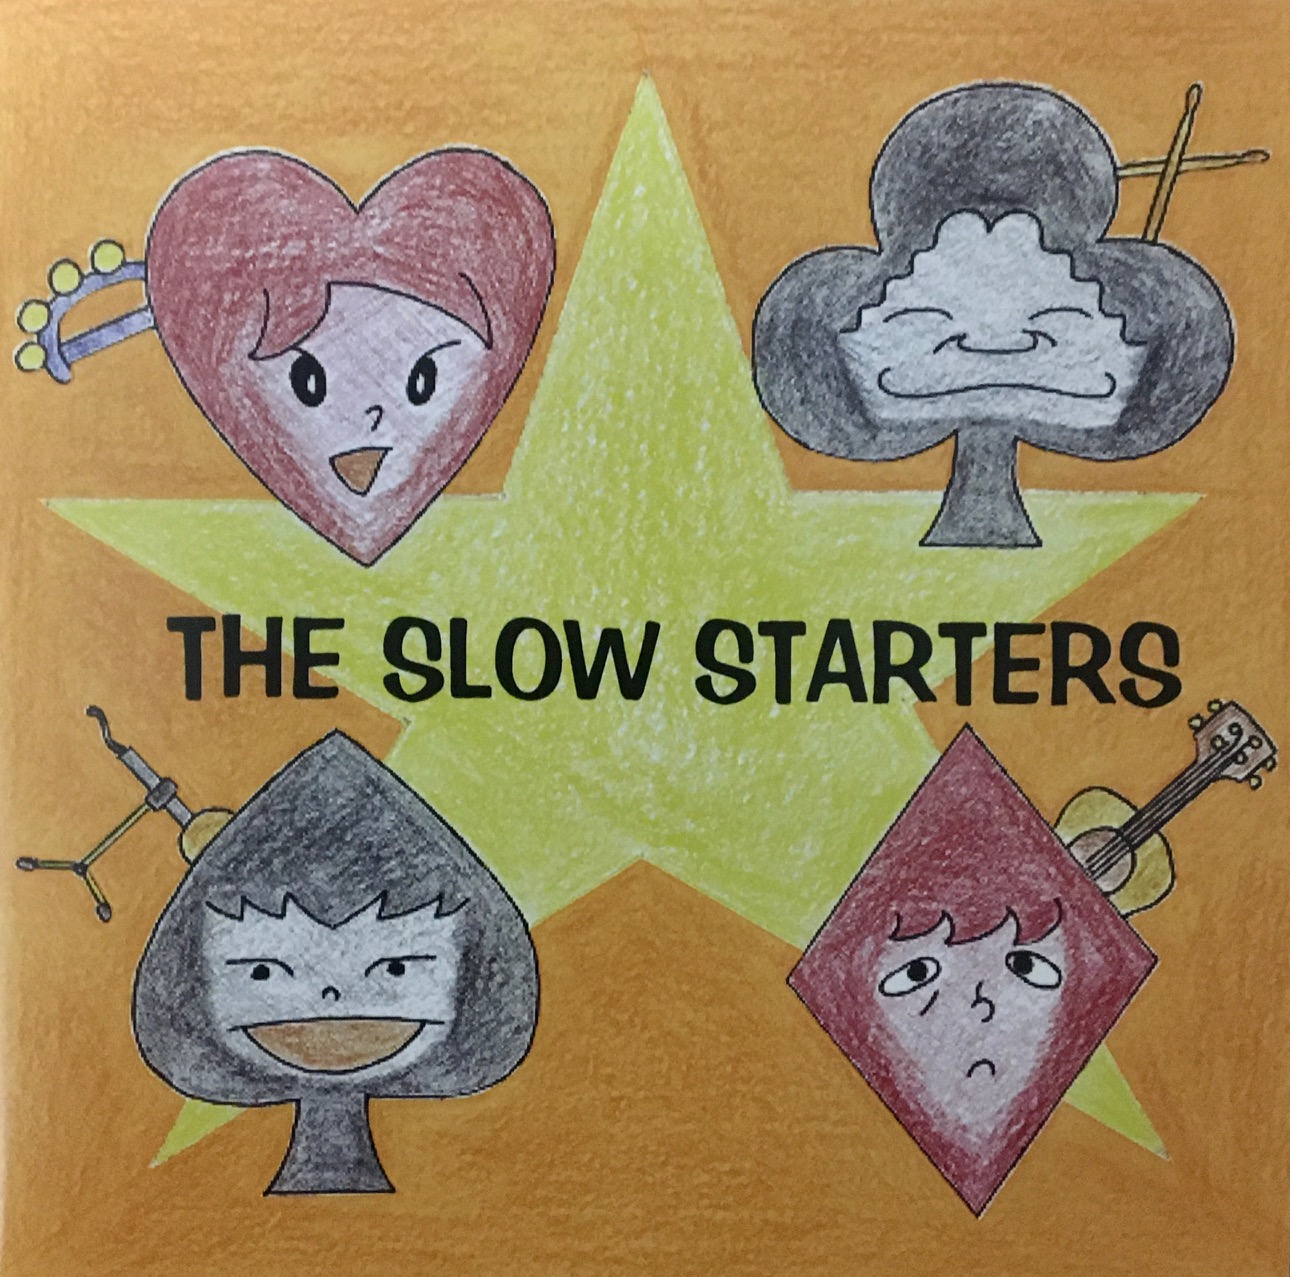 THE SLOW STARTERS